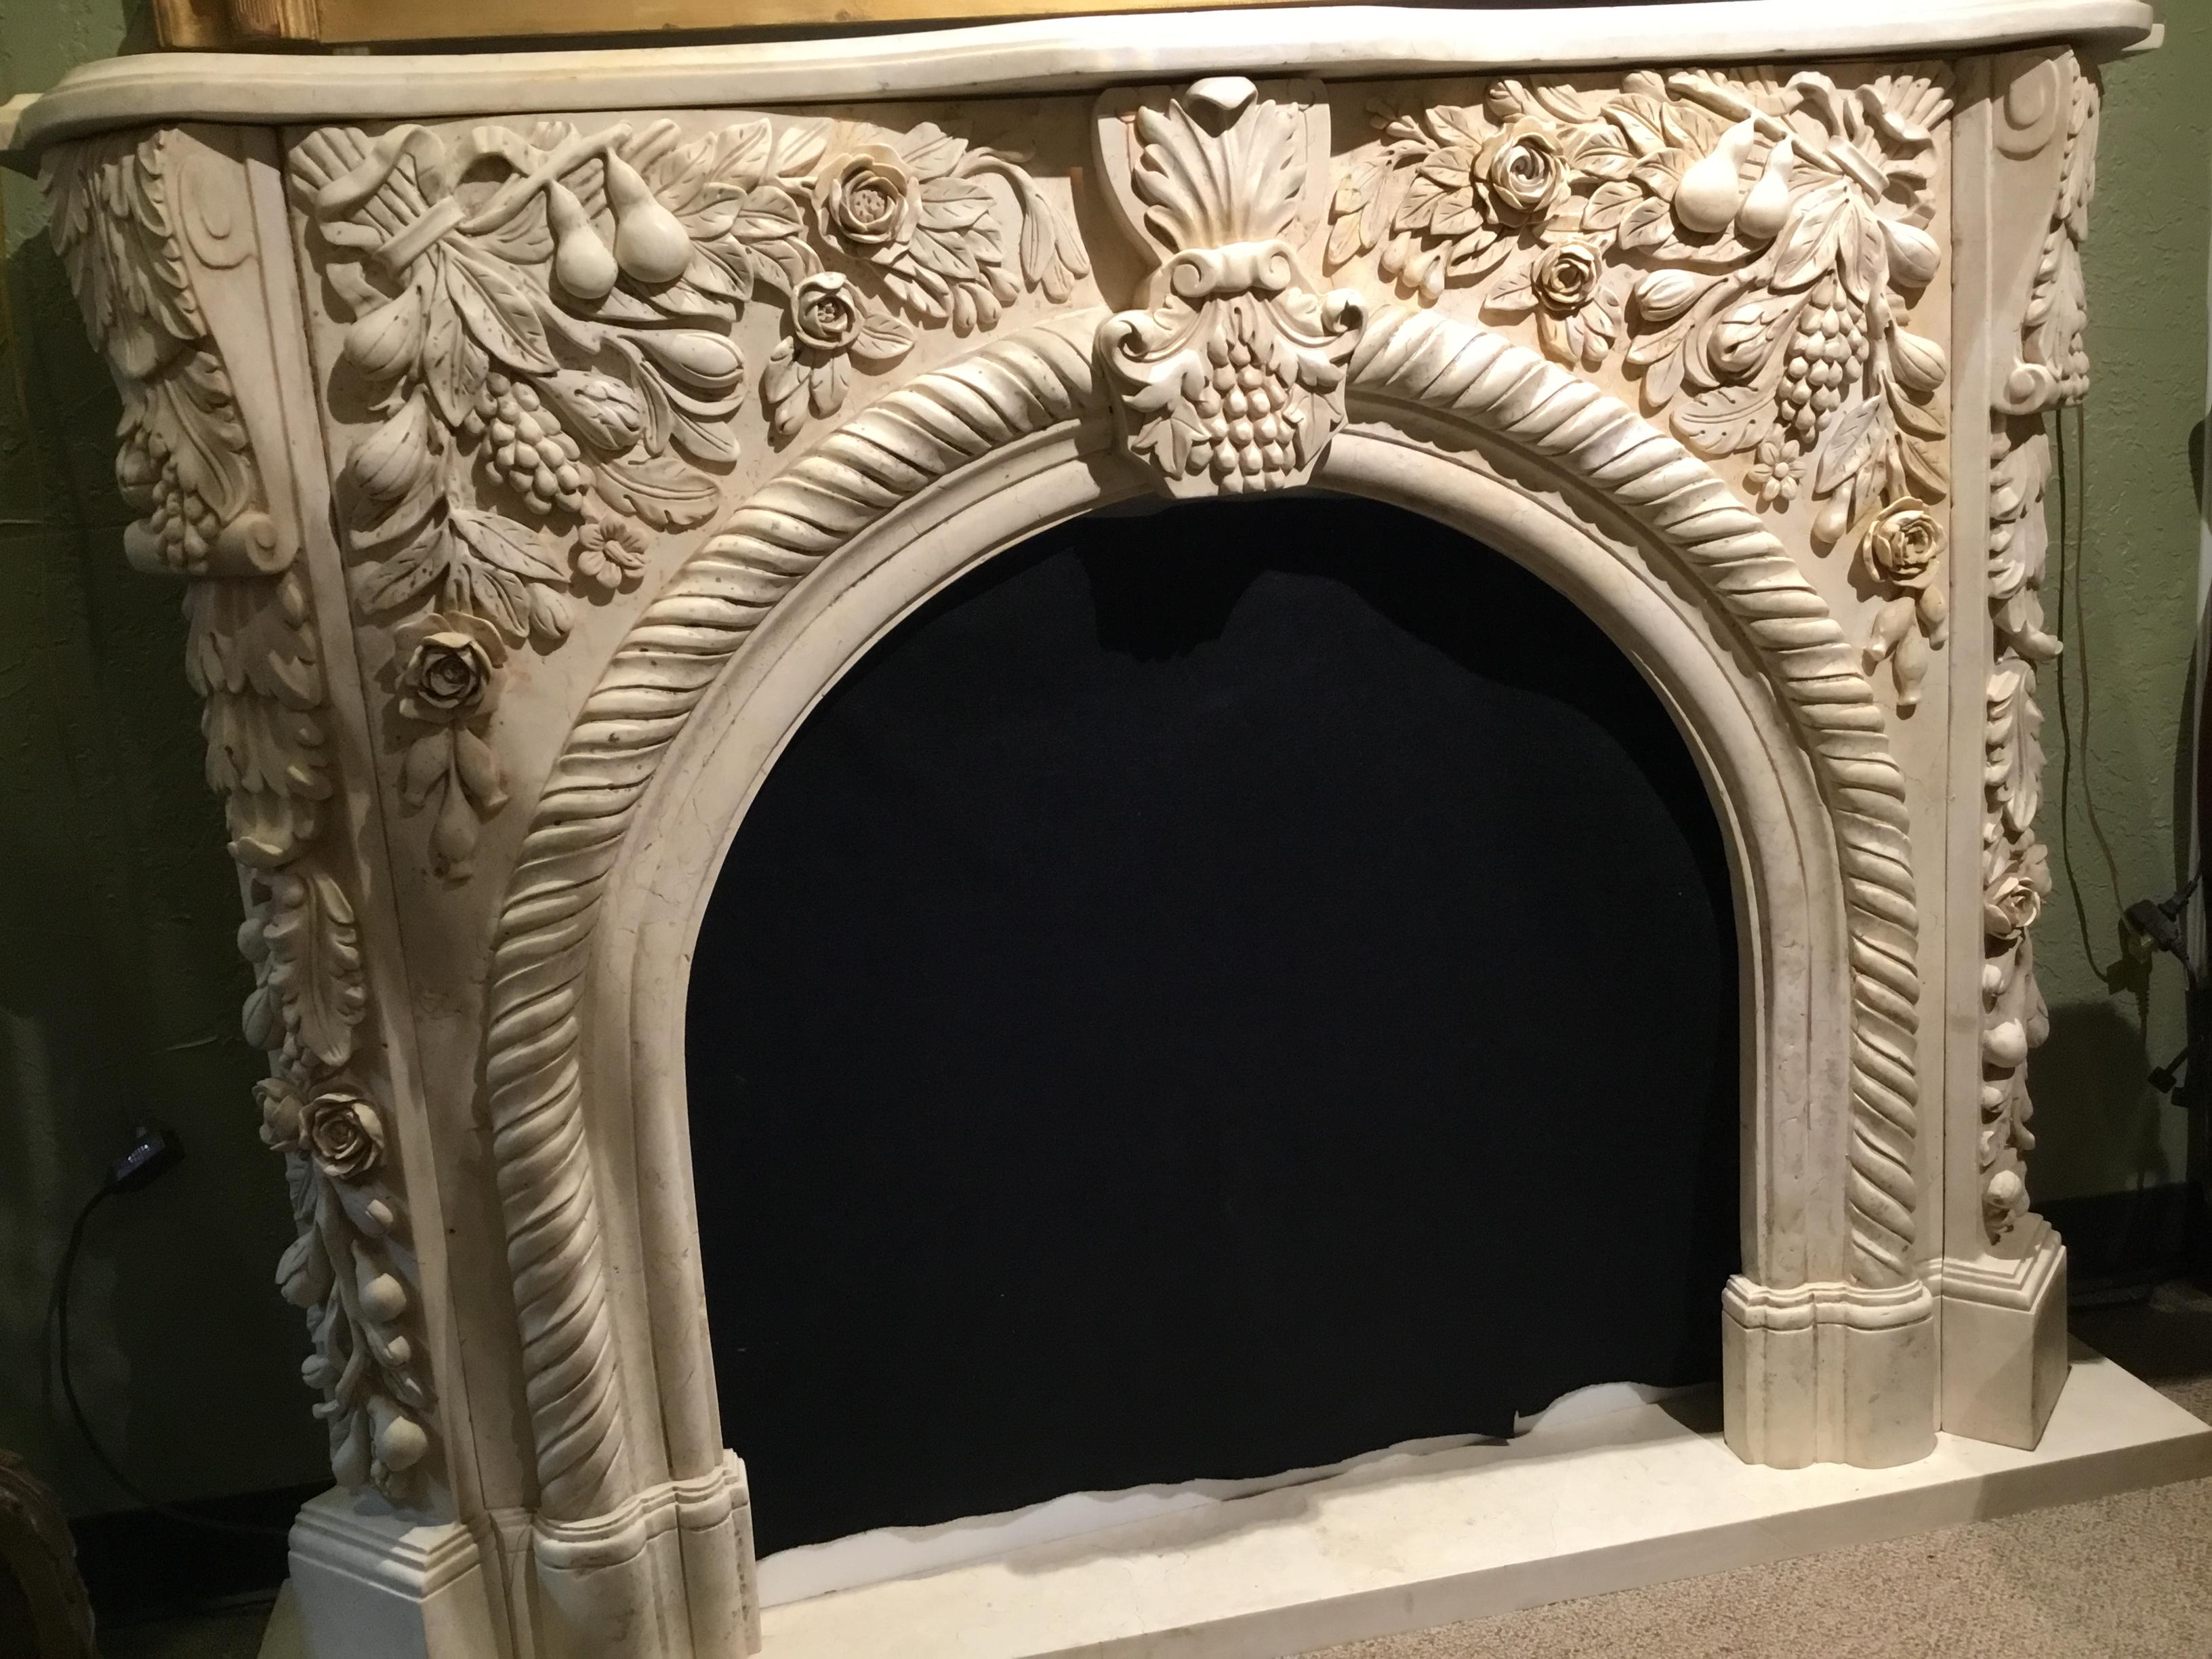 Marble mantel that has a graceful arch center and has been hand carved
with foliate design and fruit and flowers. A roped edge follows the arch.
Carved corners add beauty to this handsome mantel.